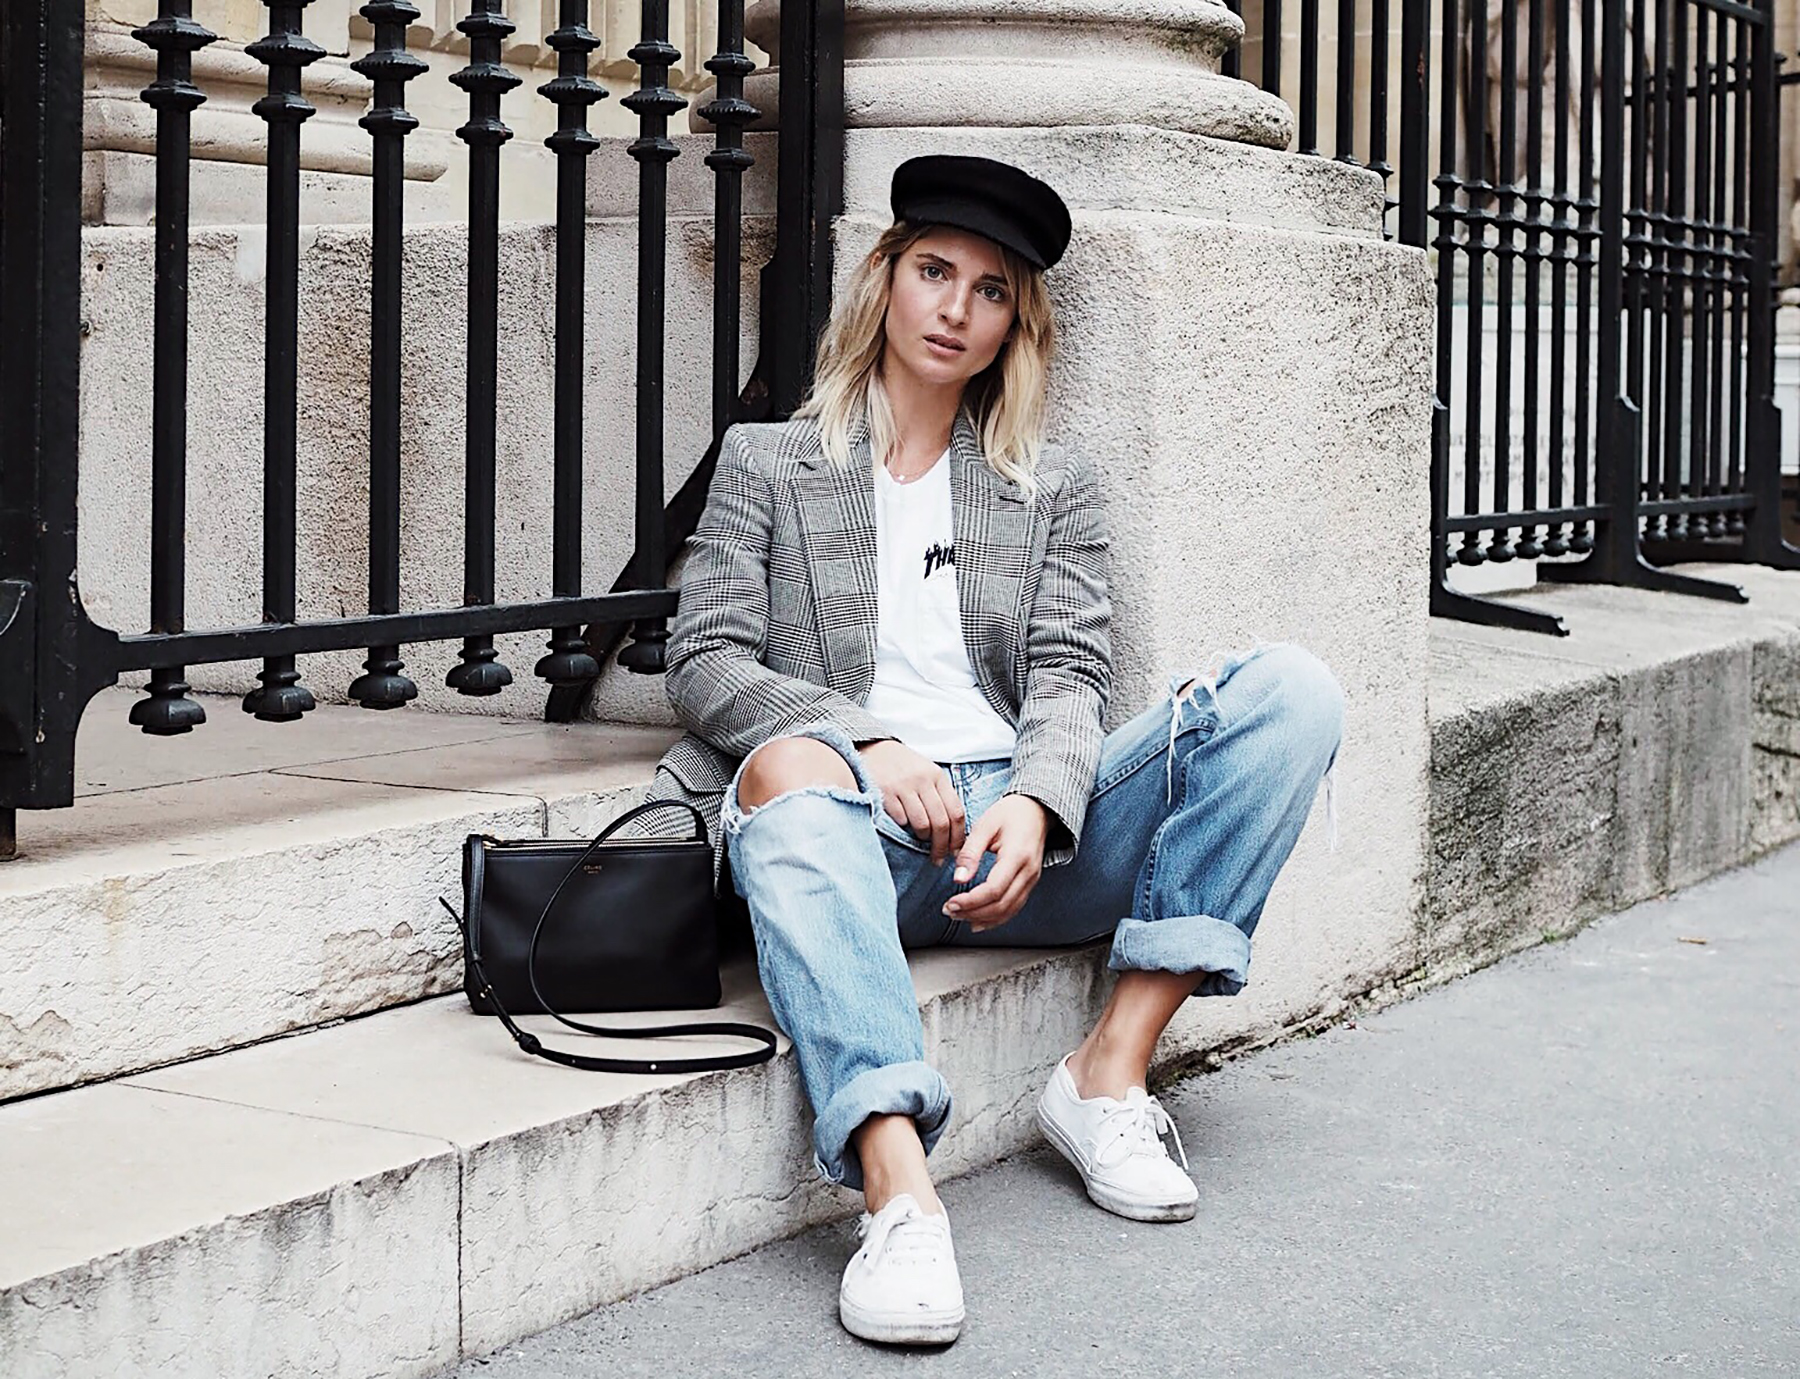 Steal Her Style: Baker Boy Hat | Love Daily Dose